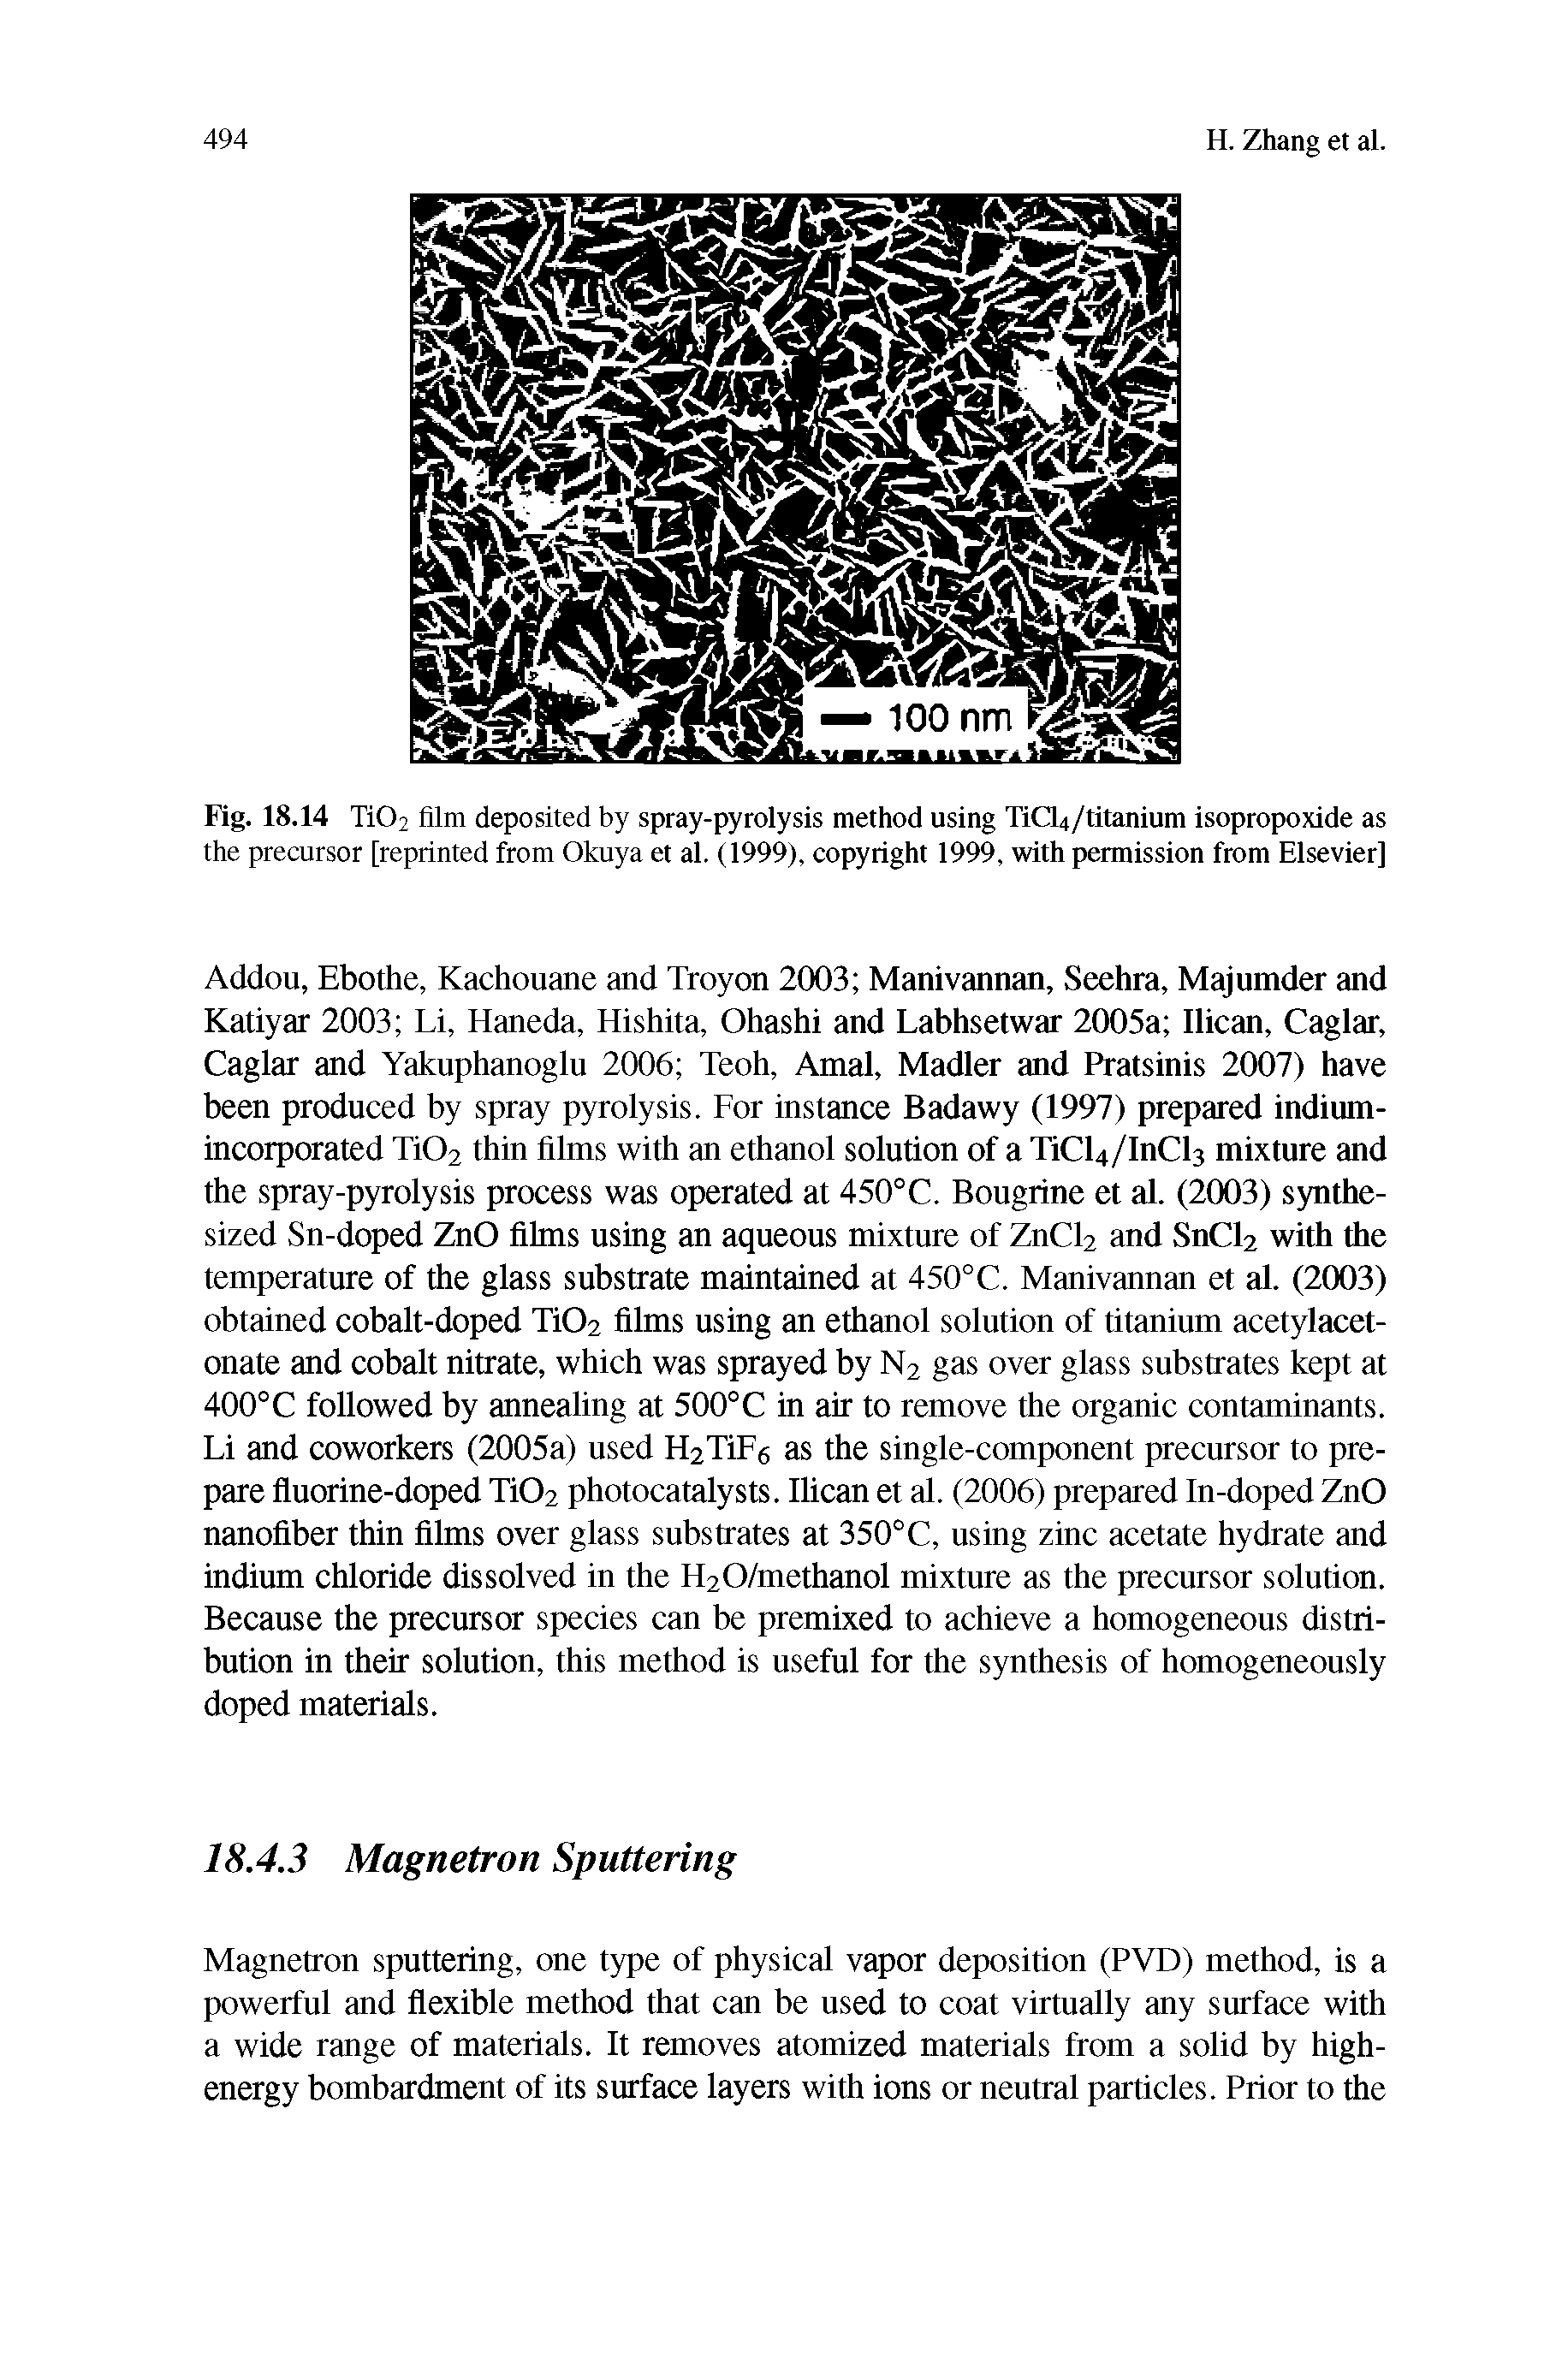 Fig. 18.14 Ti02 film deposited by spray-pyrolysis method using TiCF/titanium isopropoxide as the precursor [reprinted from Okuya et al. (1999), copyright 1999, with permission from Elsevier]...